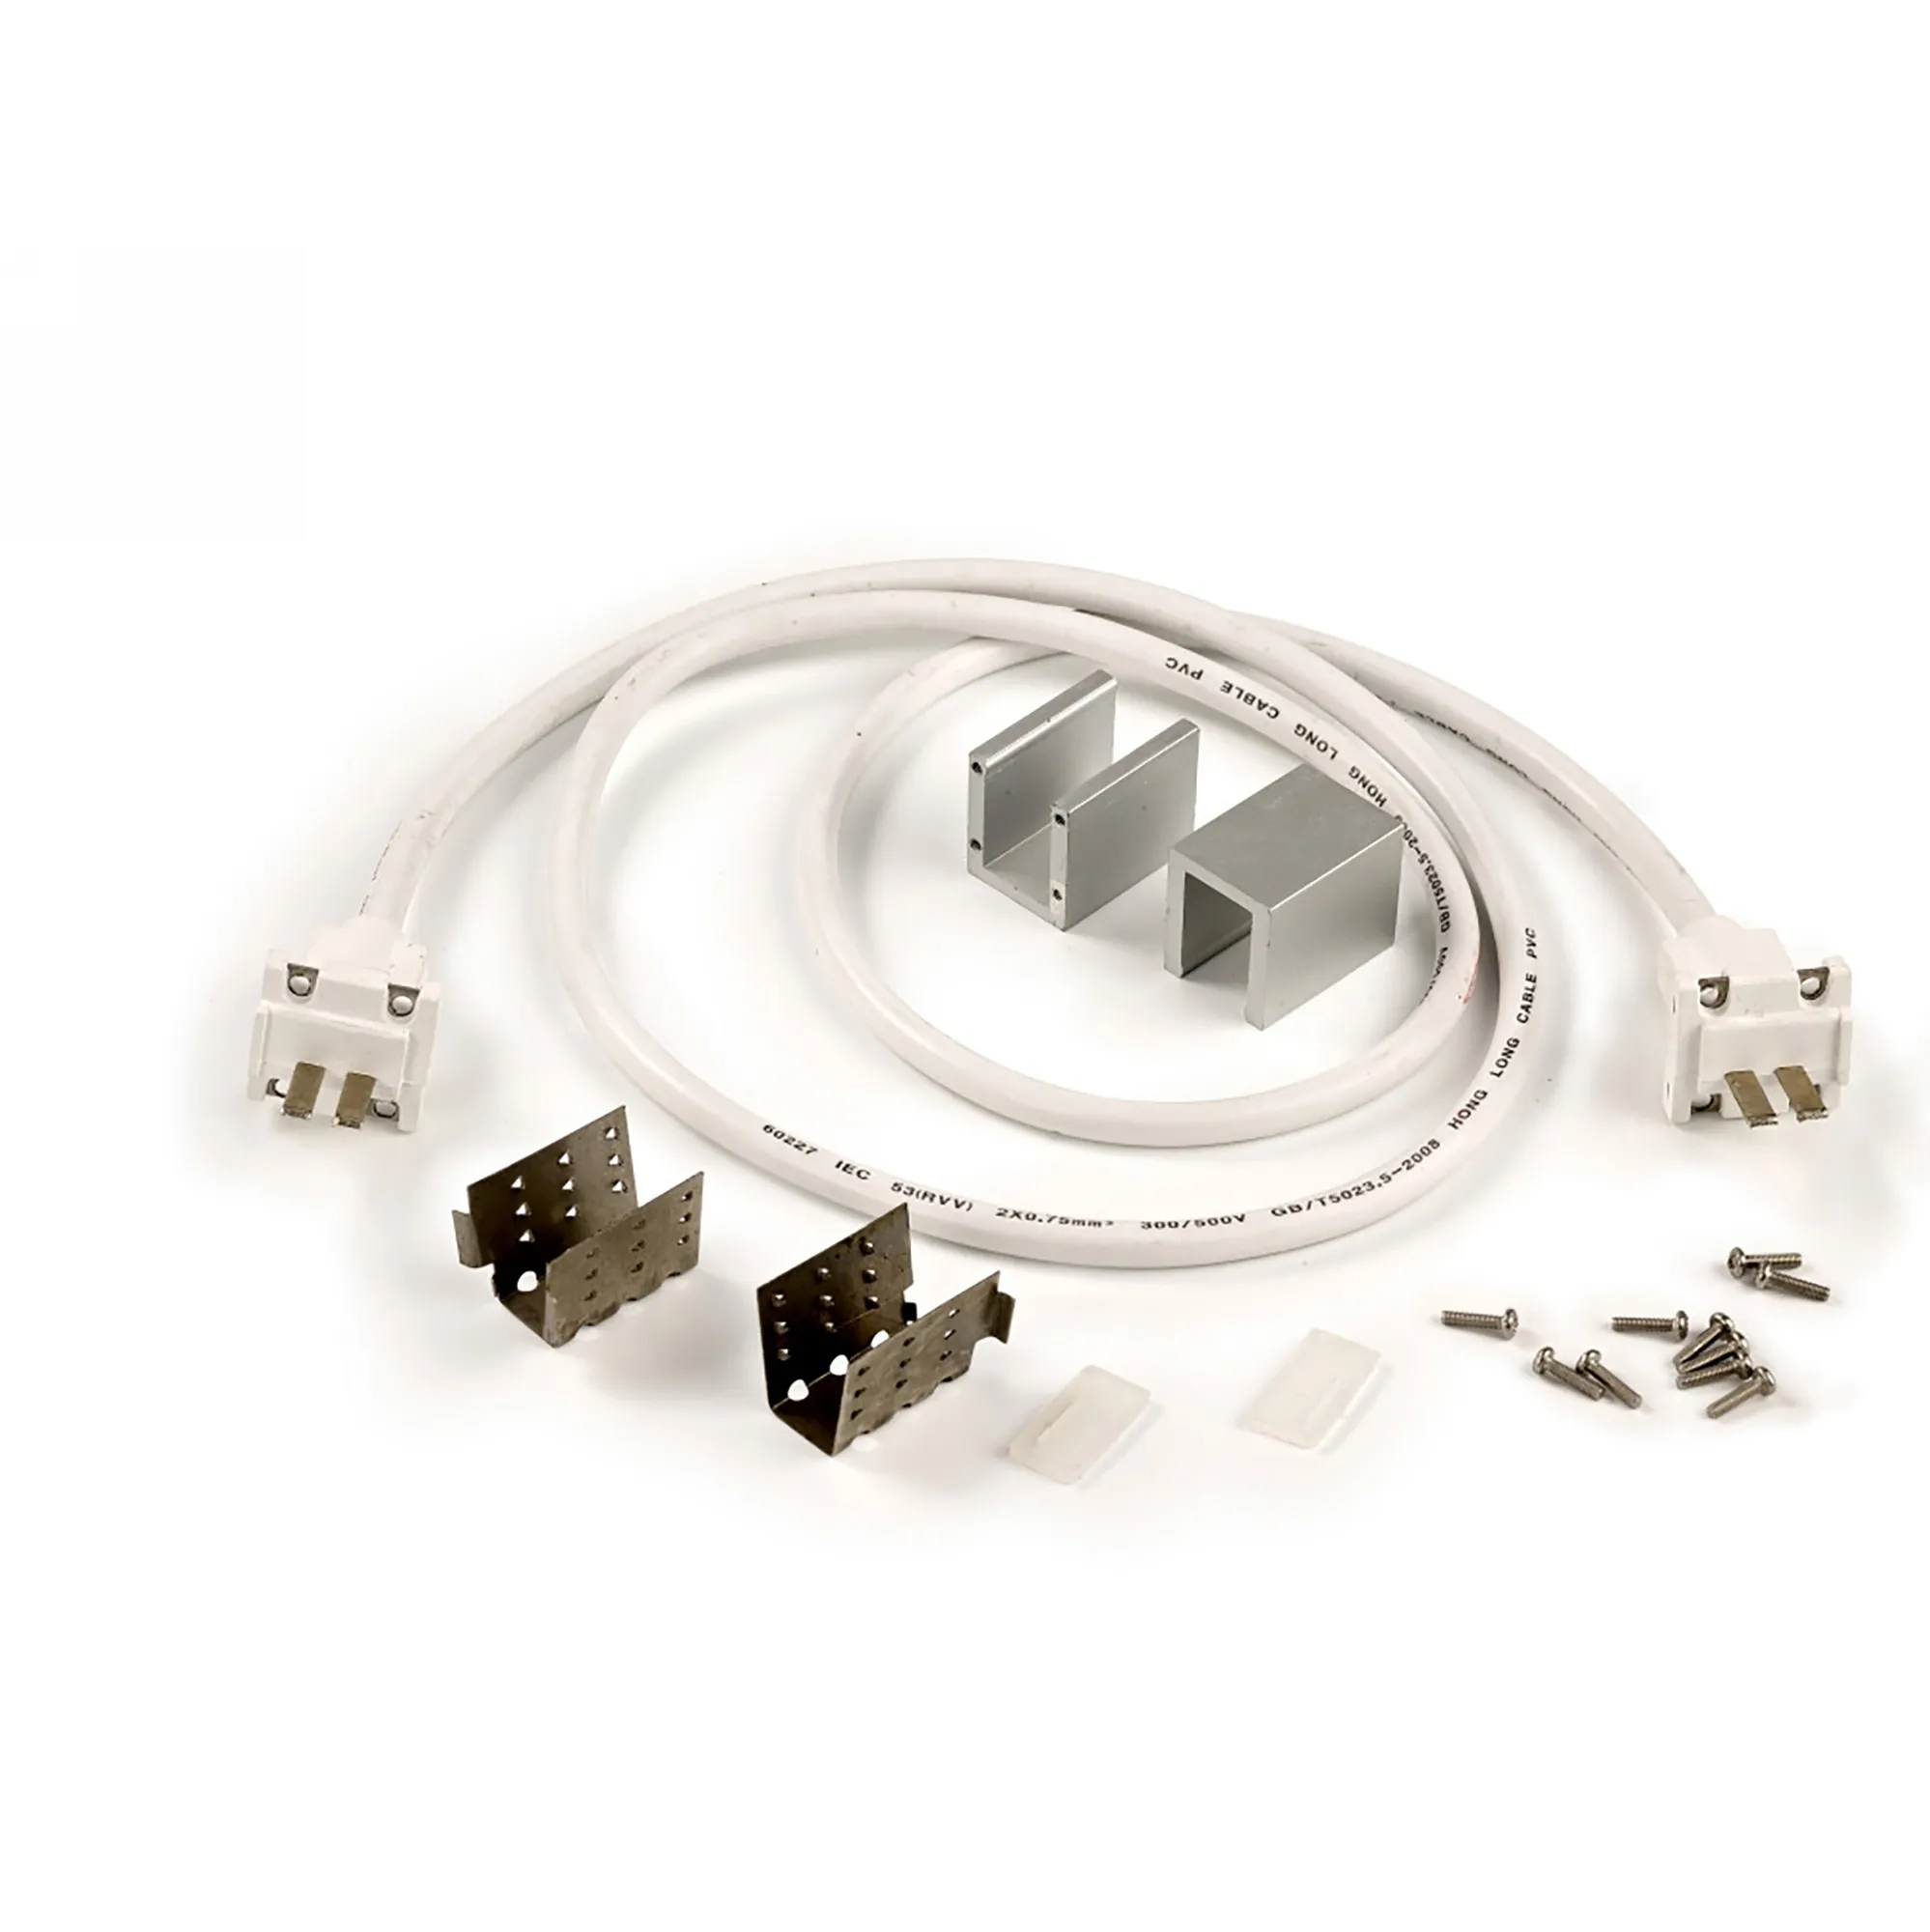 DX770045  Nexi 60/Pixel SF/SR; Splice Connector Kit Right To Left Side 1m Cable IP67/68